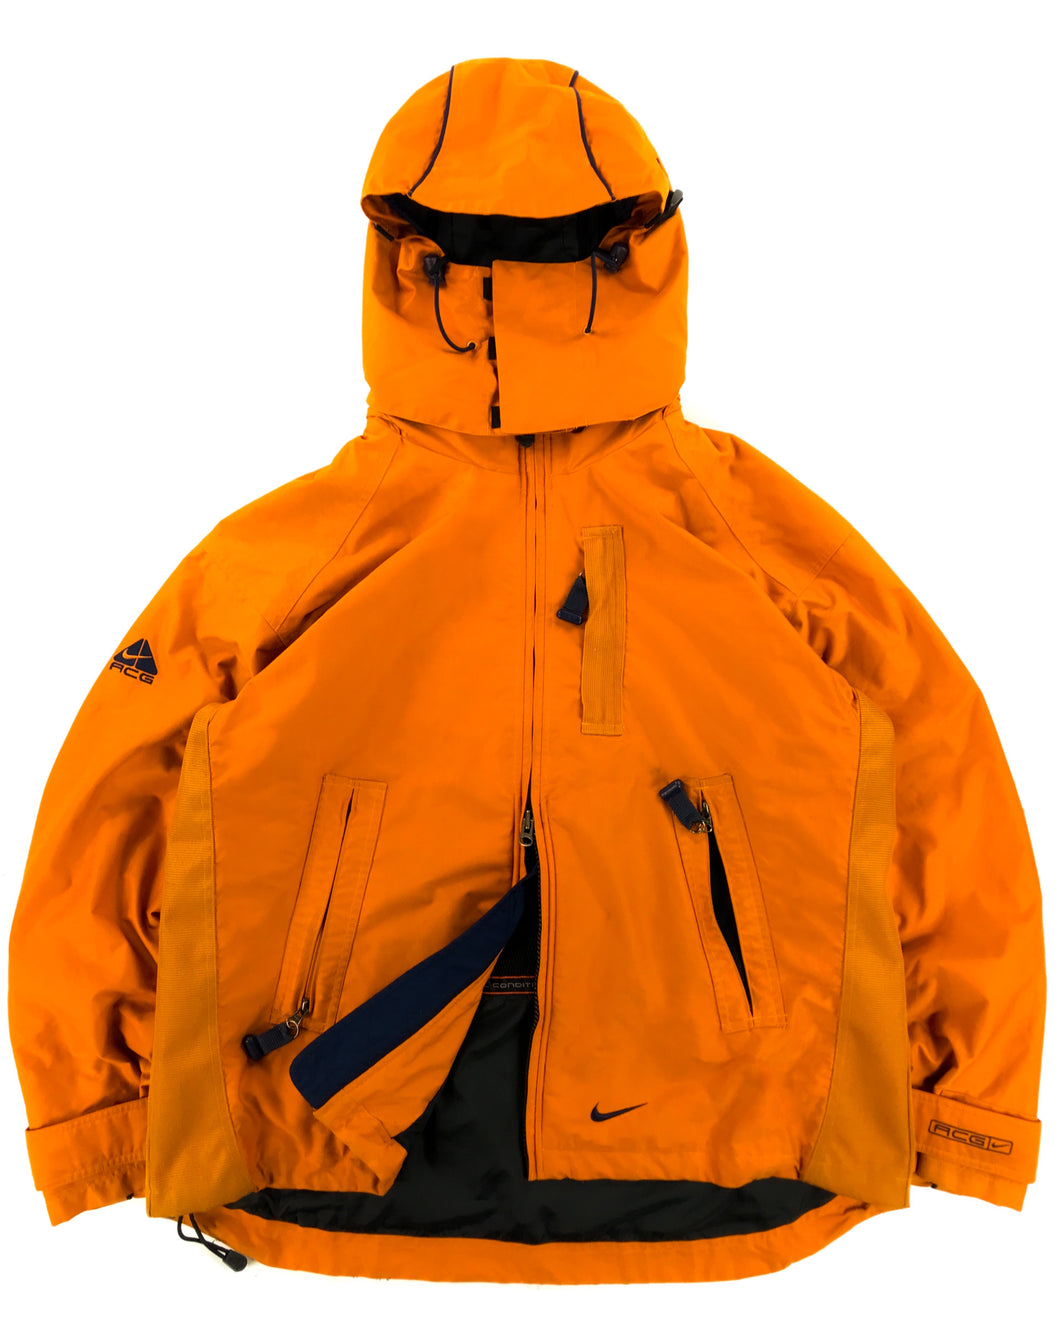 ACG Water Resistant Storm Jacket (Early 2000’s)(L-XL)